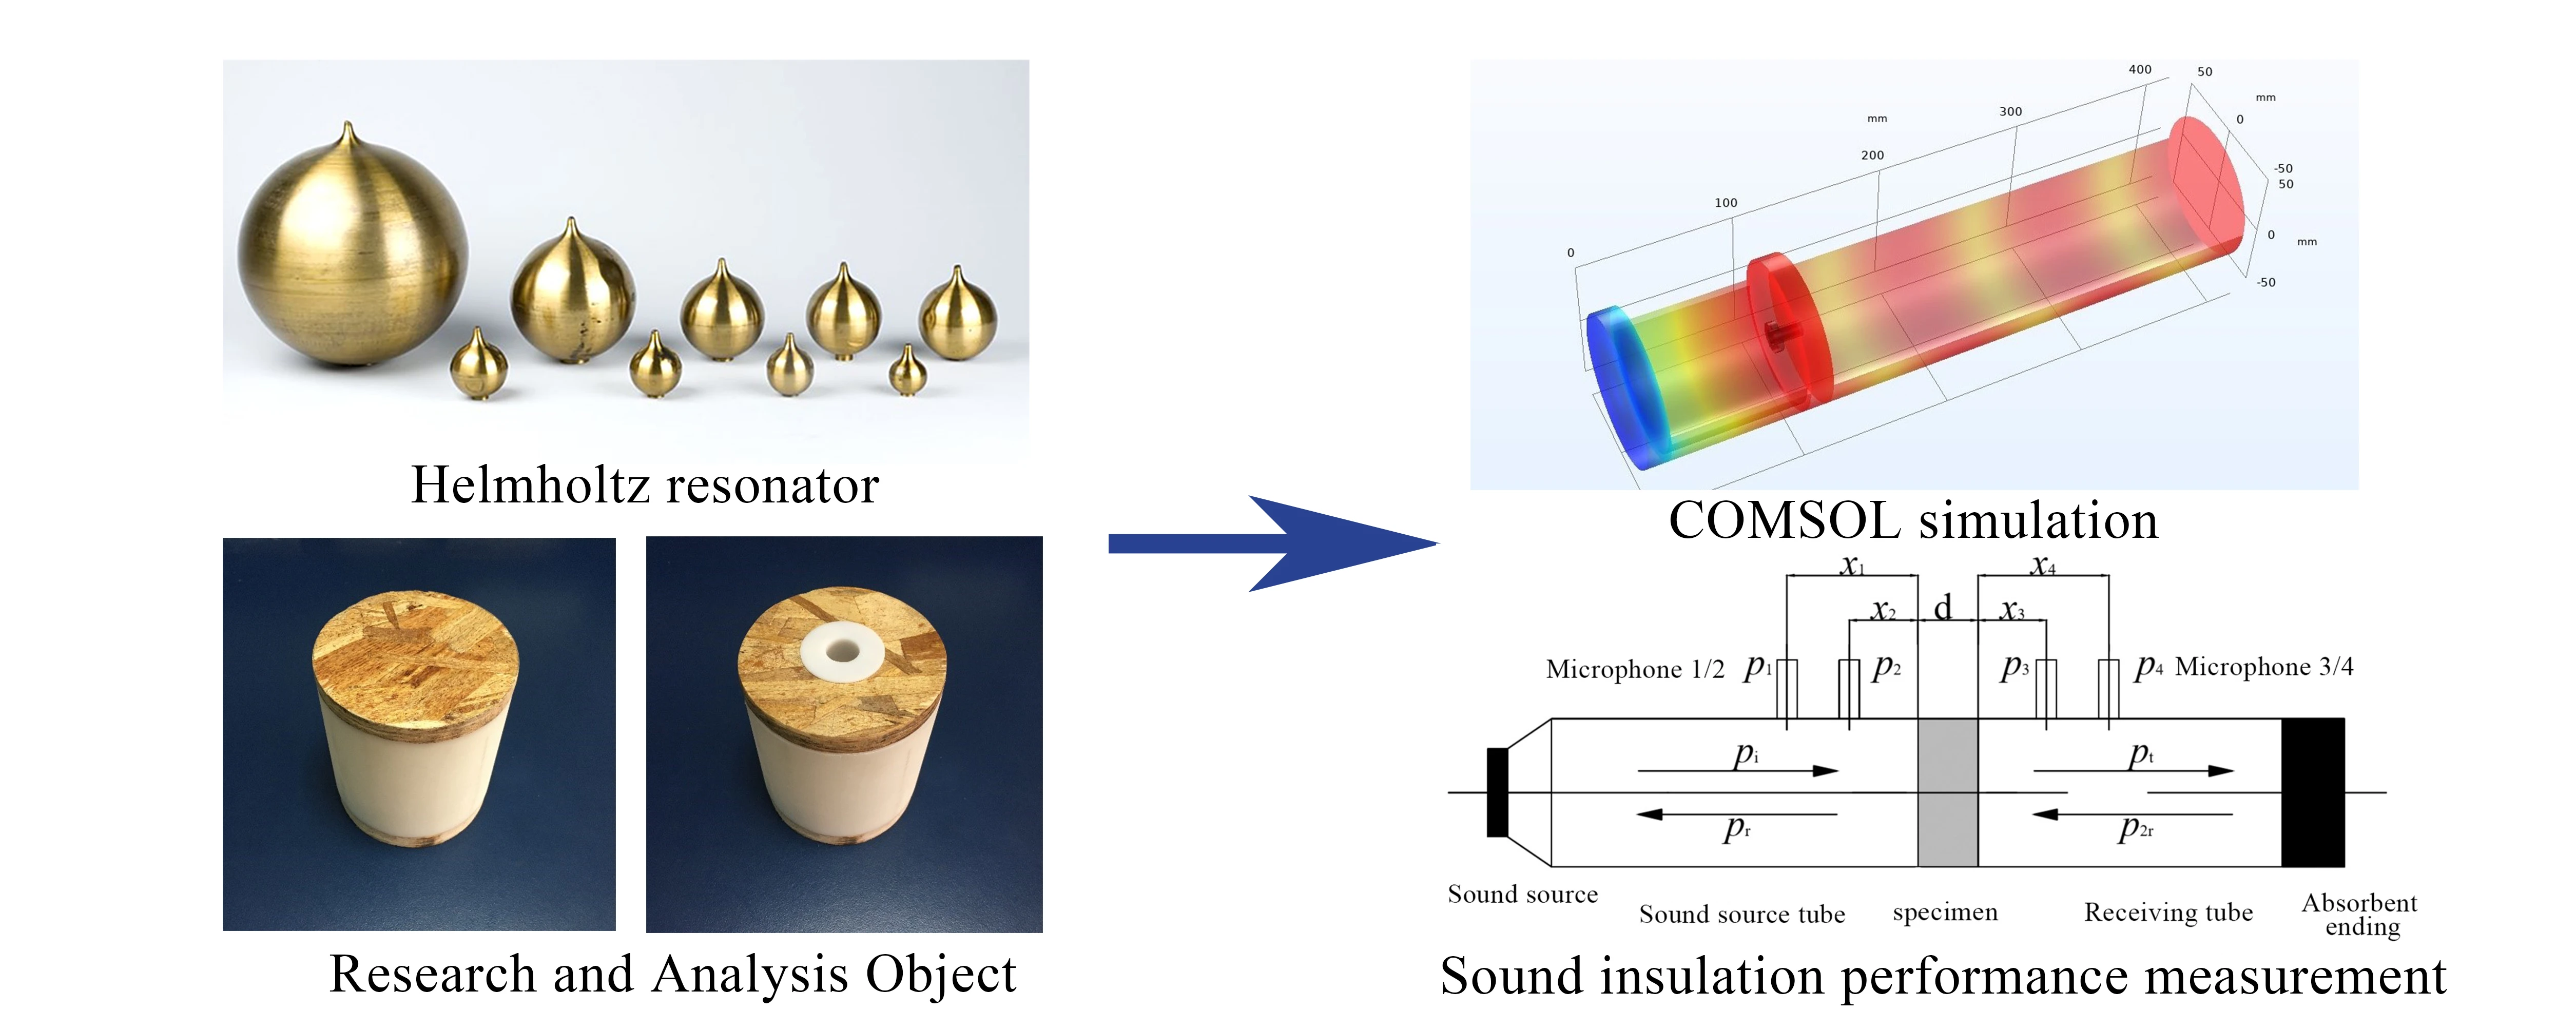 Acoustics Performance Research and Analysis of Light Timber Construction Wall Elements Based on Helmholtz Metasurface